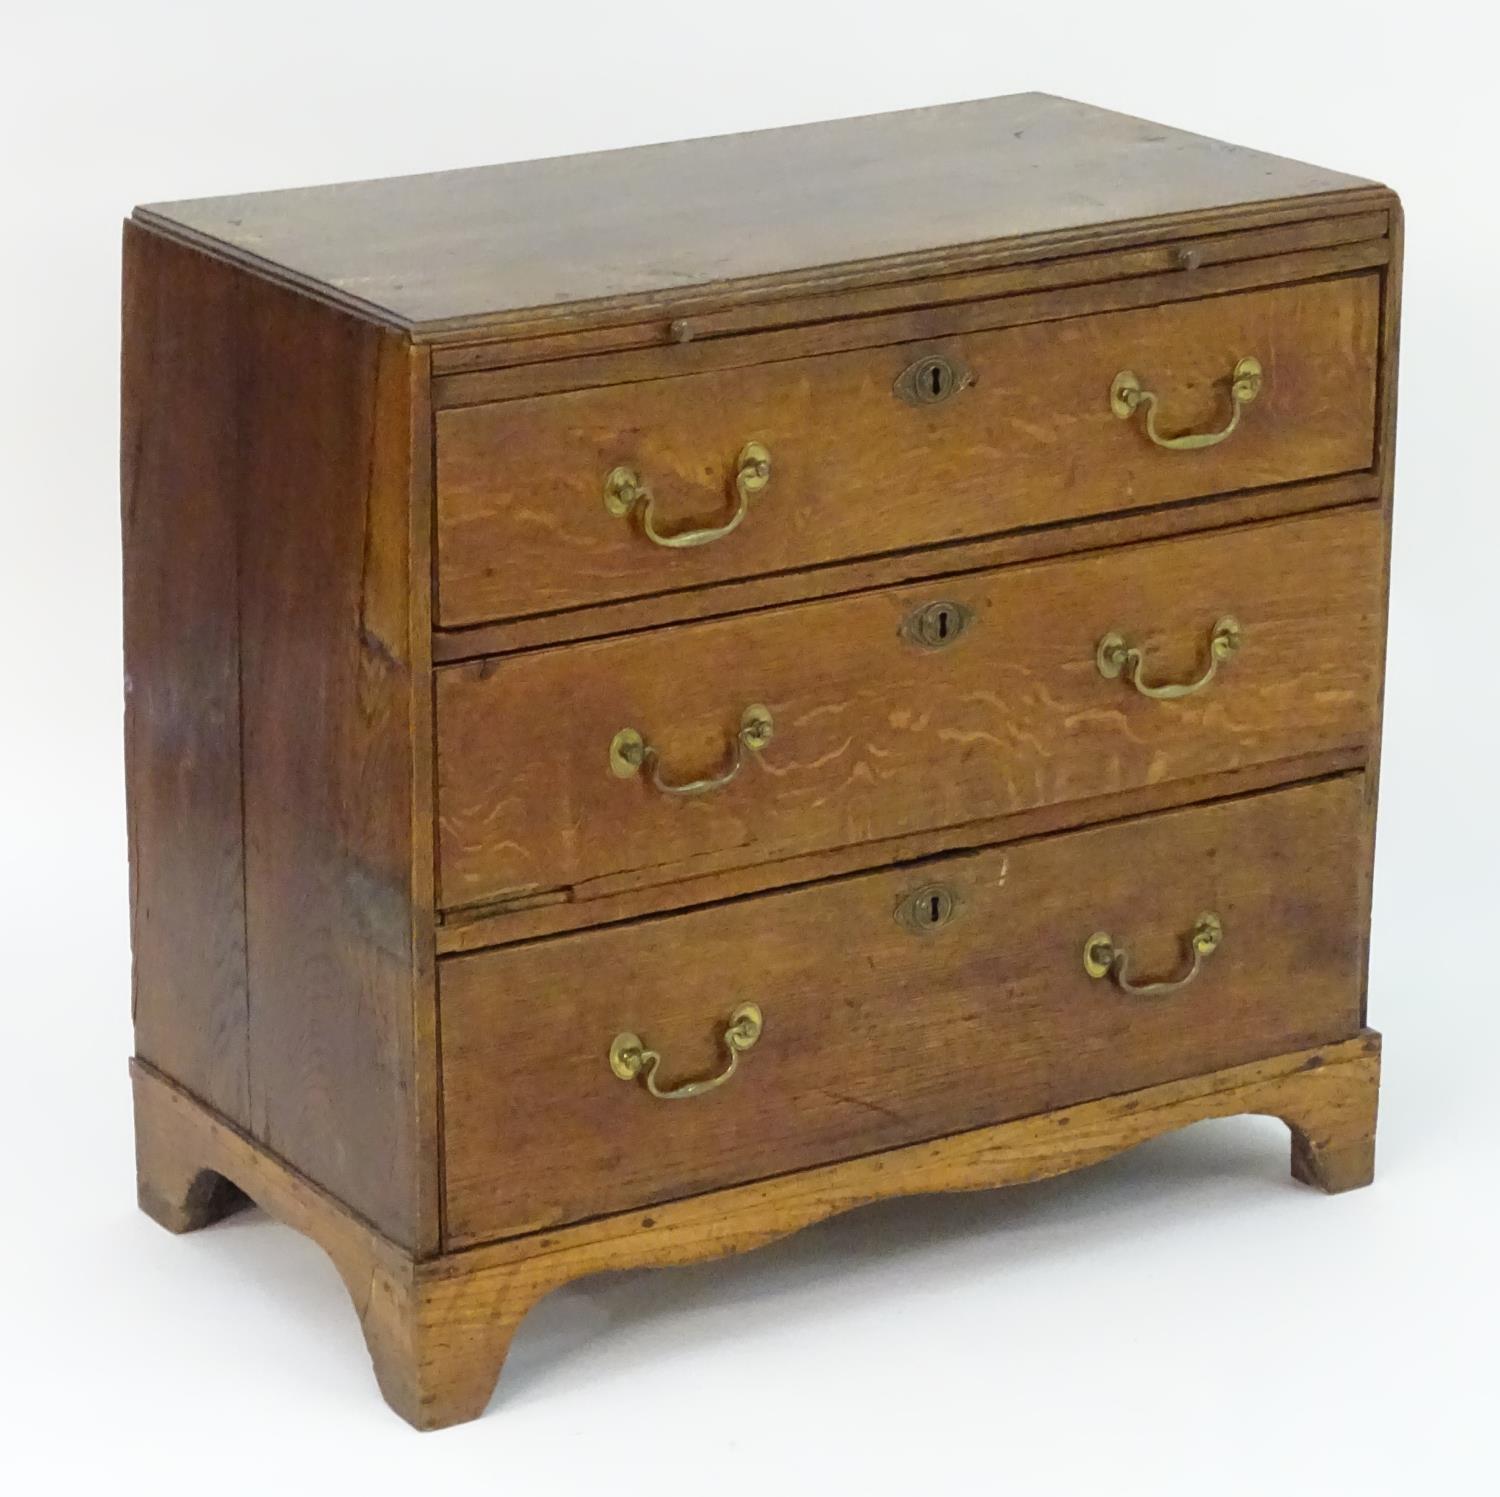 A mid 18thC oak chest of drawers with a rectangular top above a brushing slide and three long